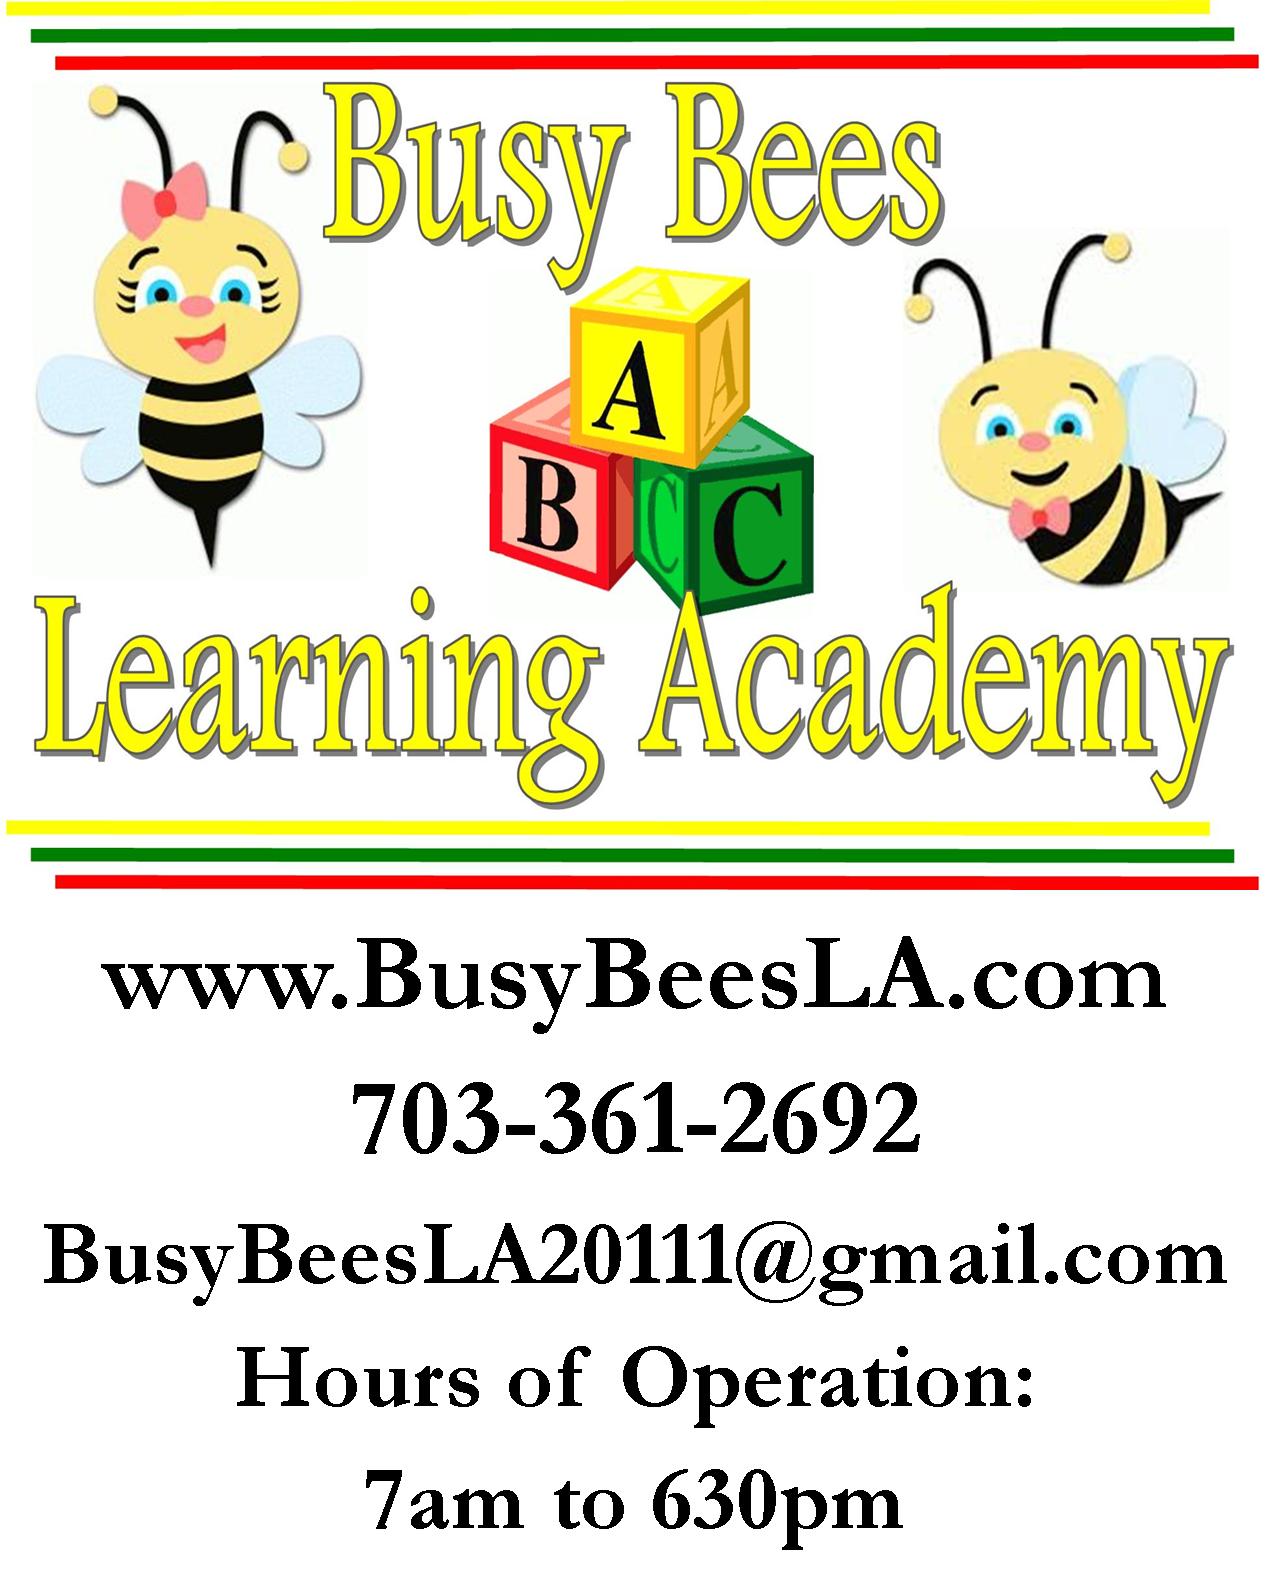 Busy Bees Learning Academy, Llc Logo